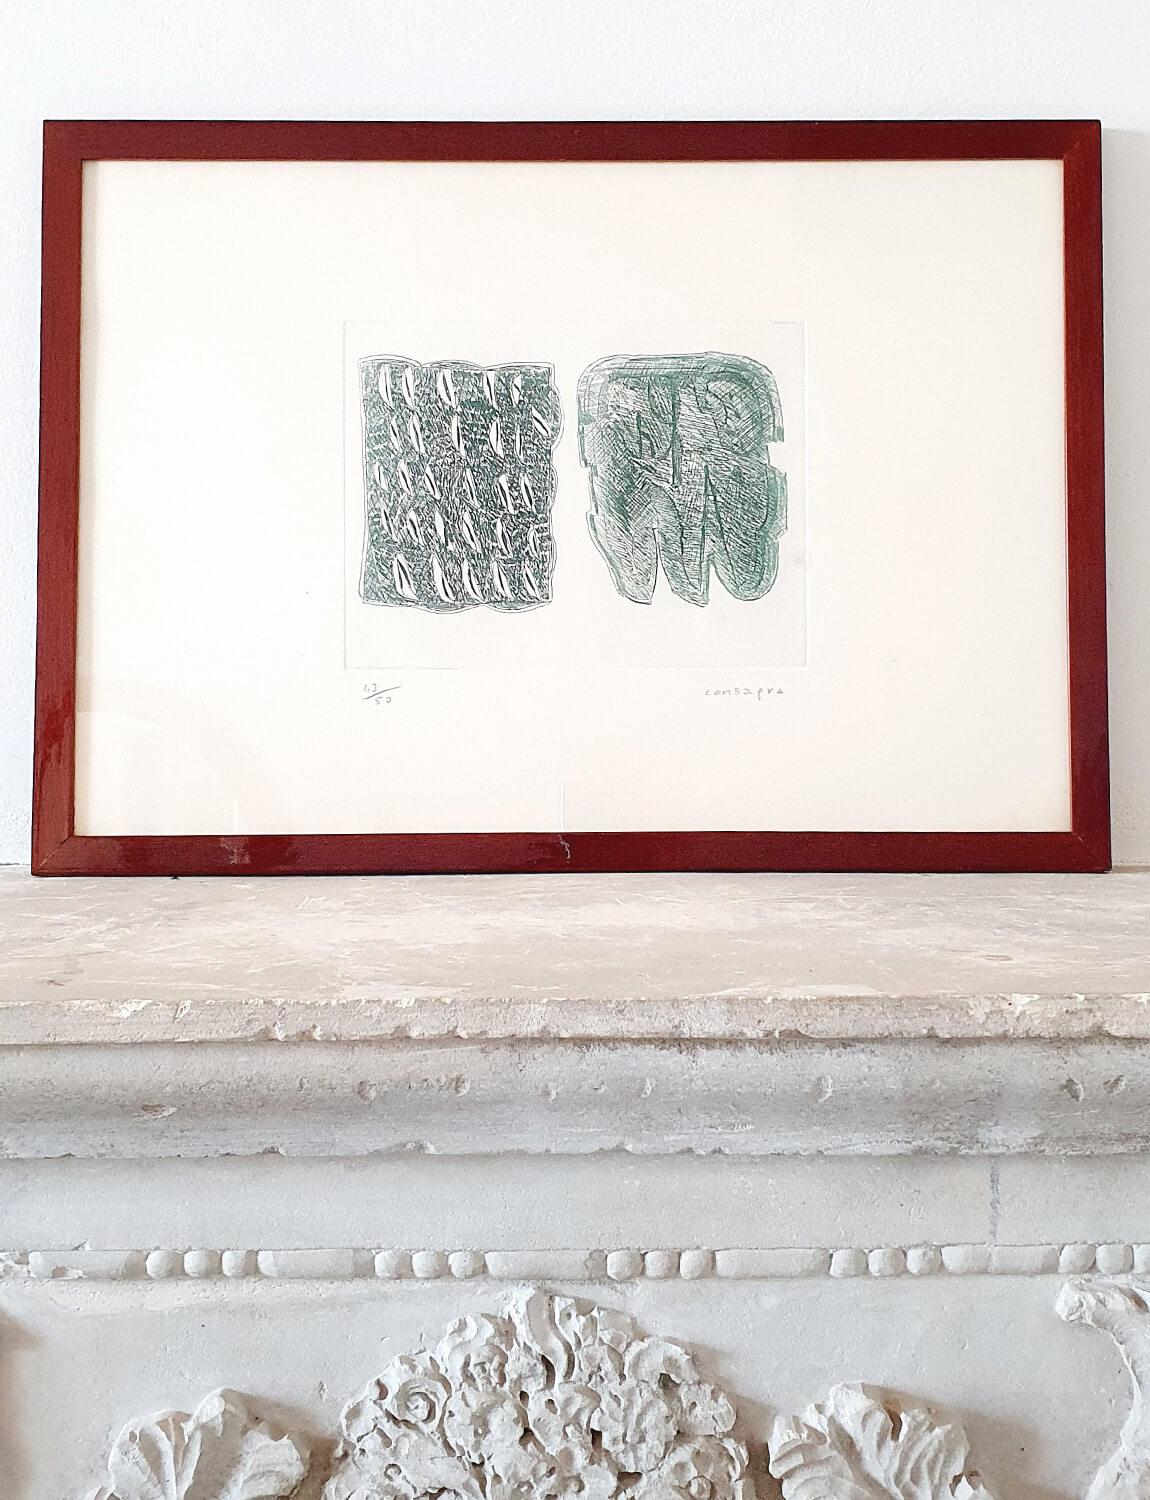 The Italian Sculptor, Artist and Writer, Pietro Consagra was born in Milan in 1930 and died in 2005. He is one of Italy's most famous modern abstract artists. His pieces are on show all over the world in the collections of some of the foremost